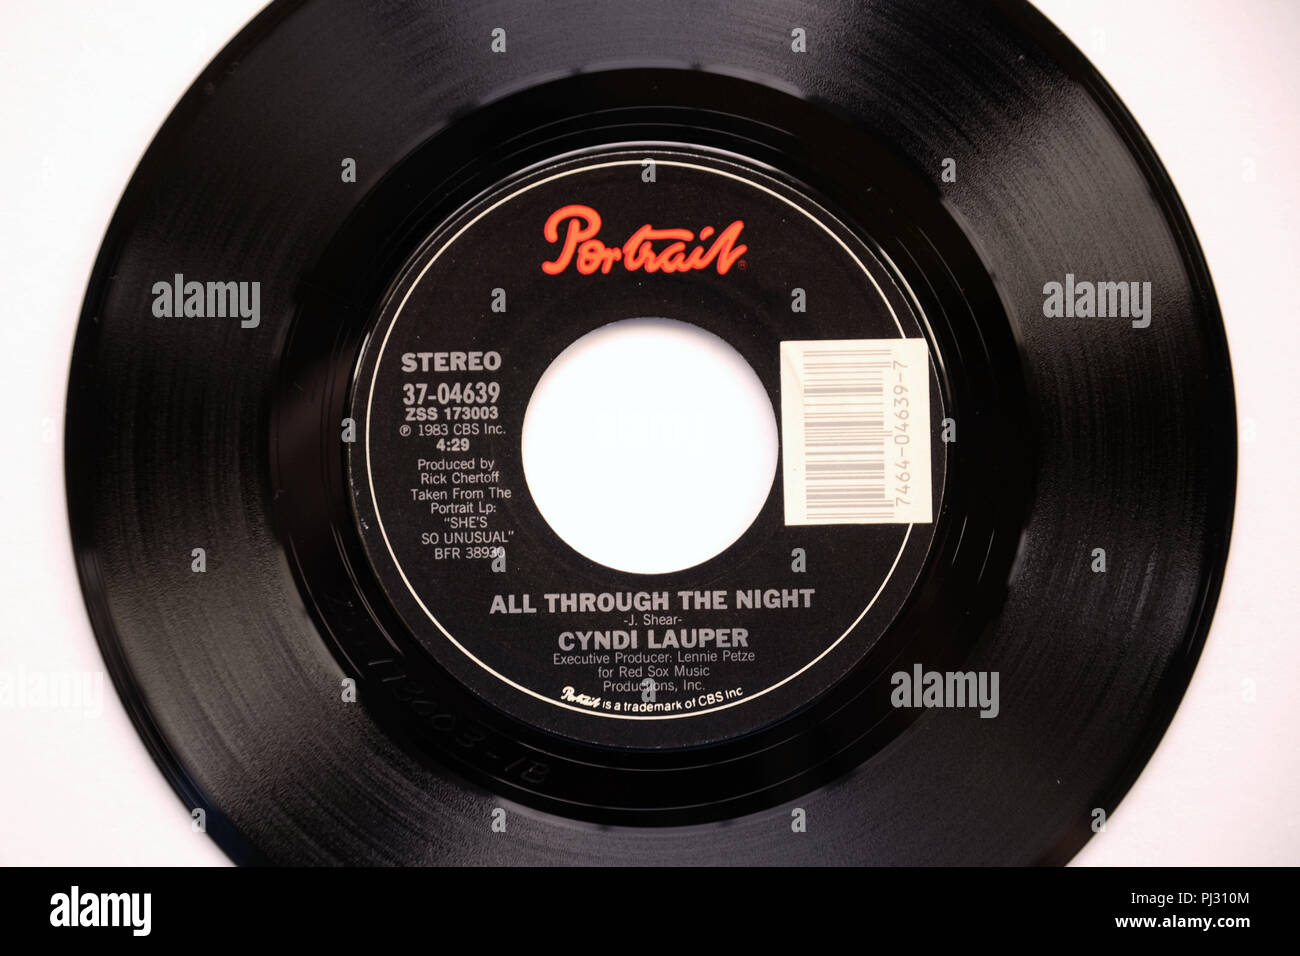 Close-up of the 45 RPM vinyl record of Cyndi Lauper's song 'All Through The Night' released in 1983 by Portrait Records. Stock Photo